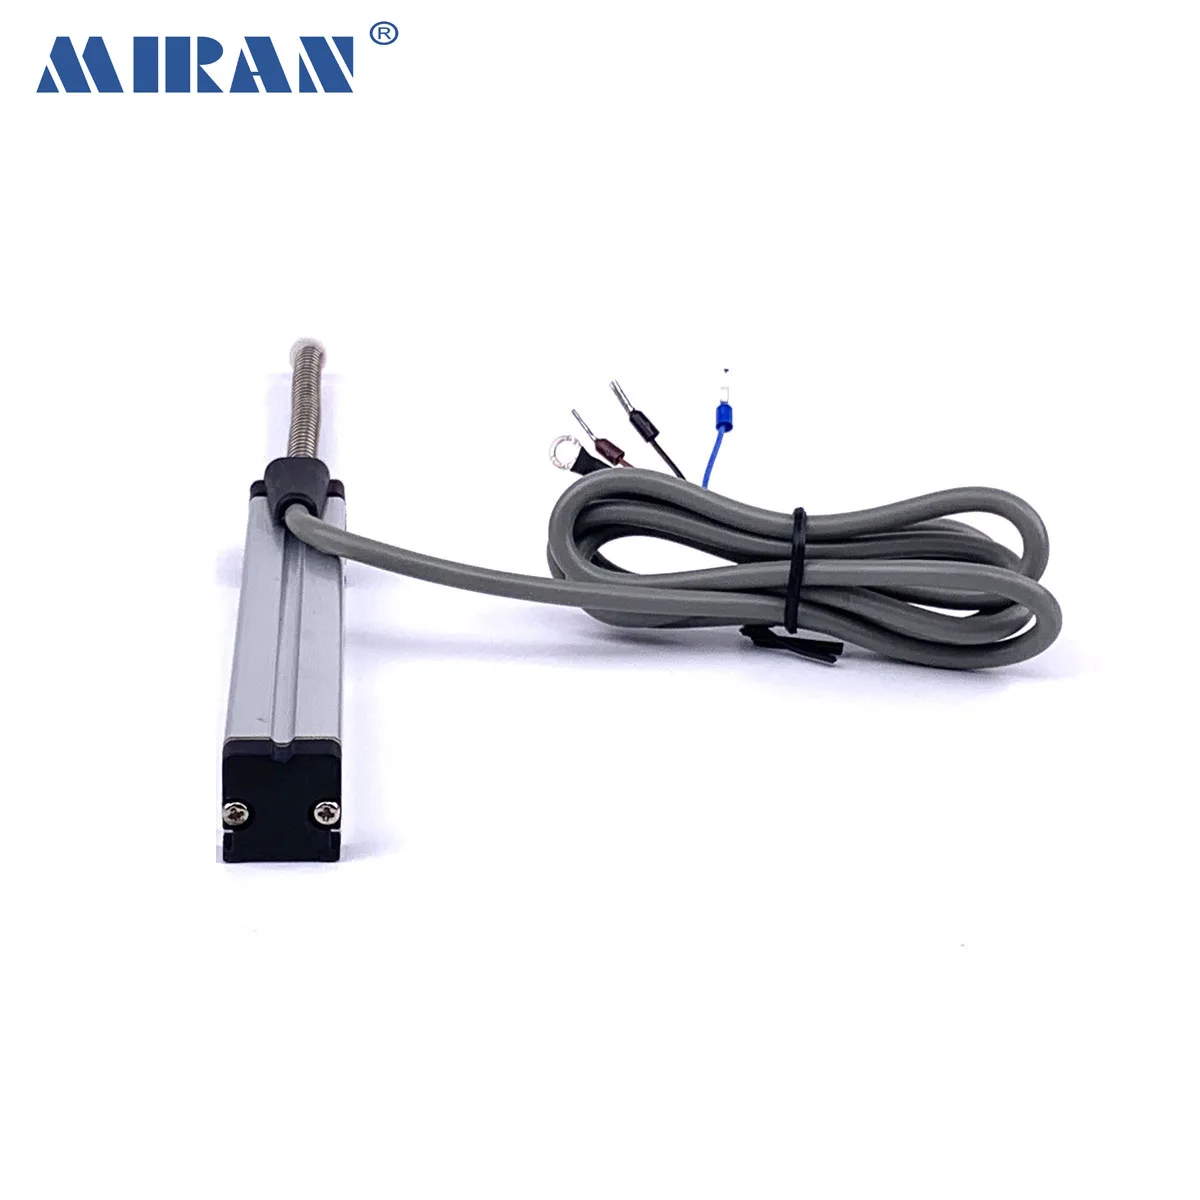 Miran Spring Self-return KTR2 10mm-25mm Displacement Transducer Accuracy 0.0005mm High Precision Linear Position Sensor/Scale enlarge